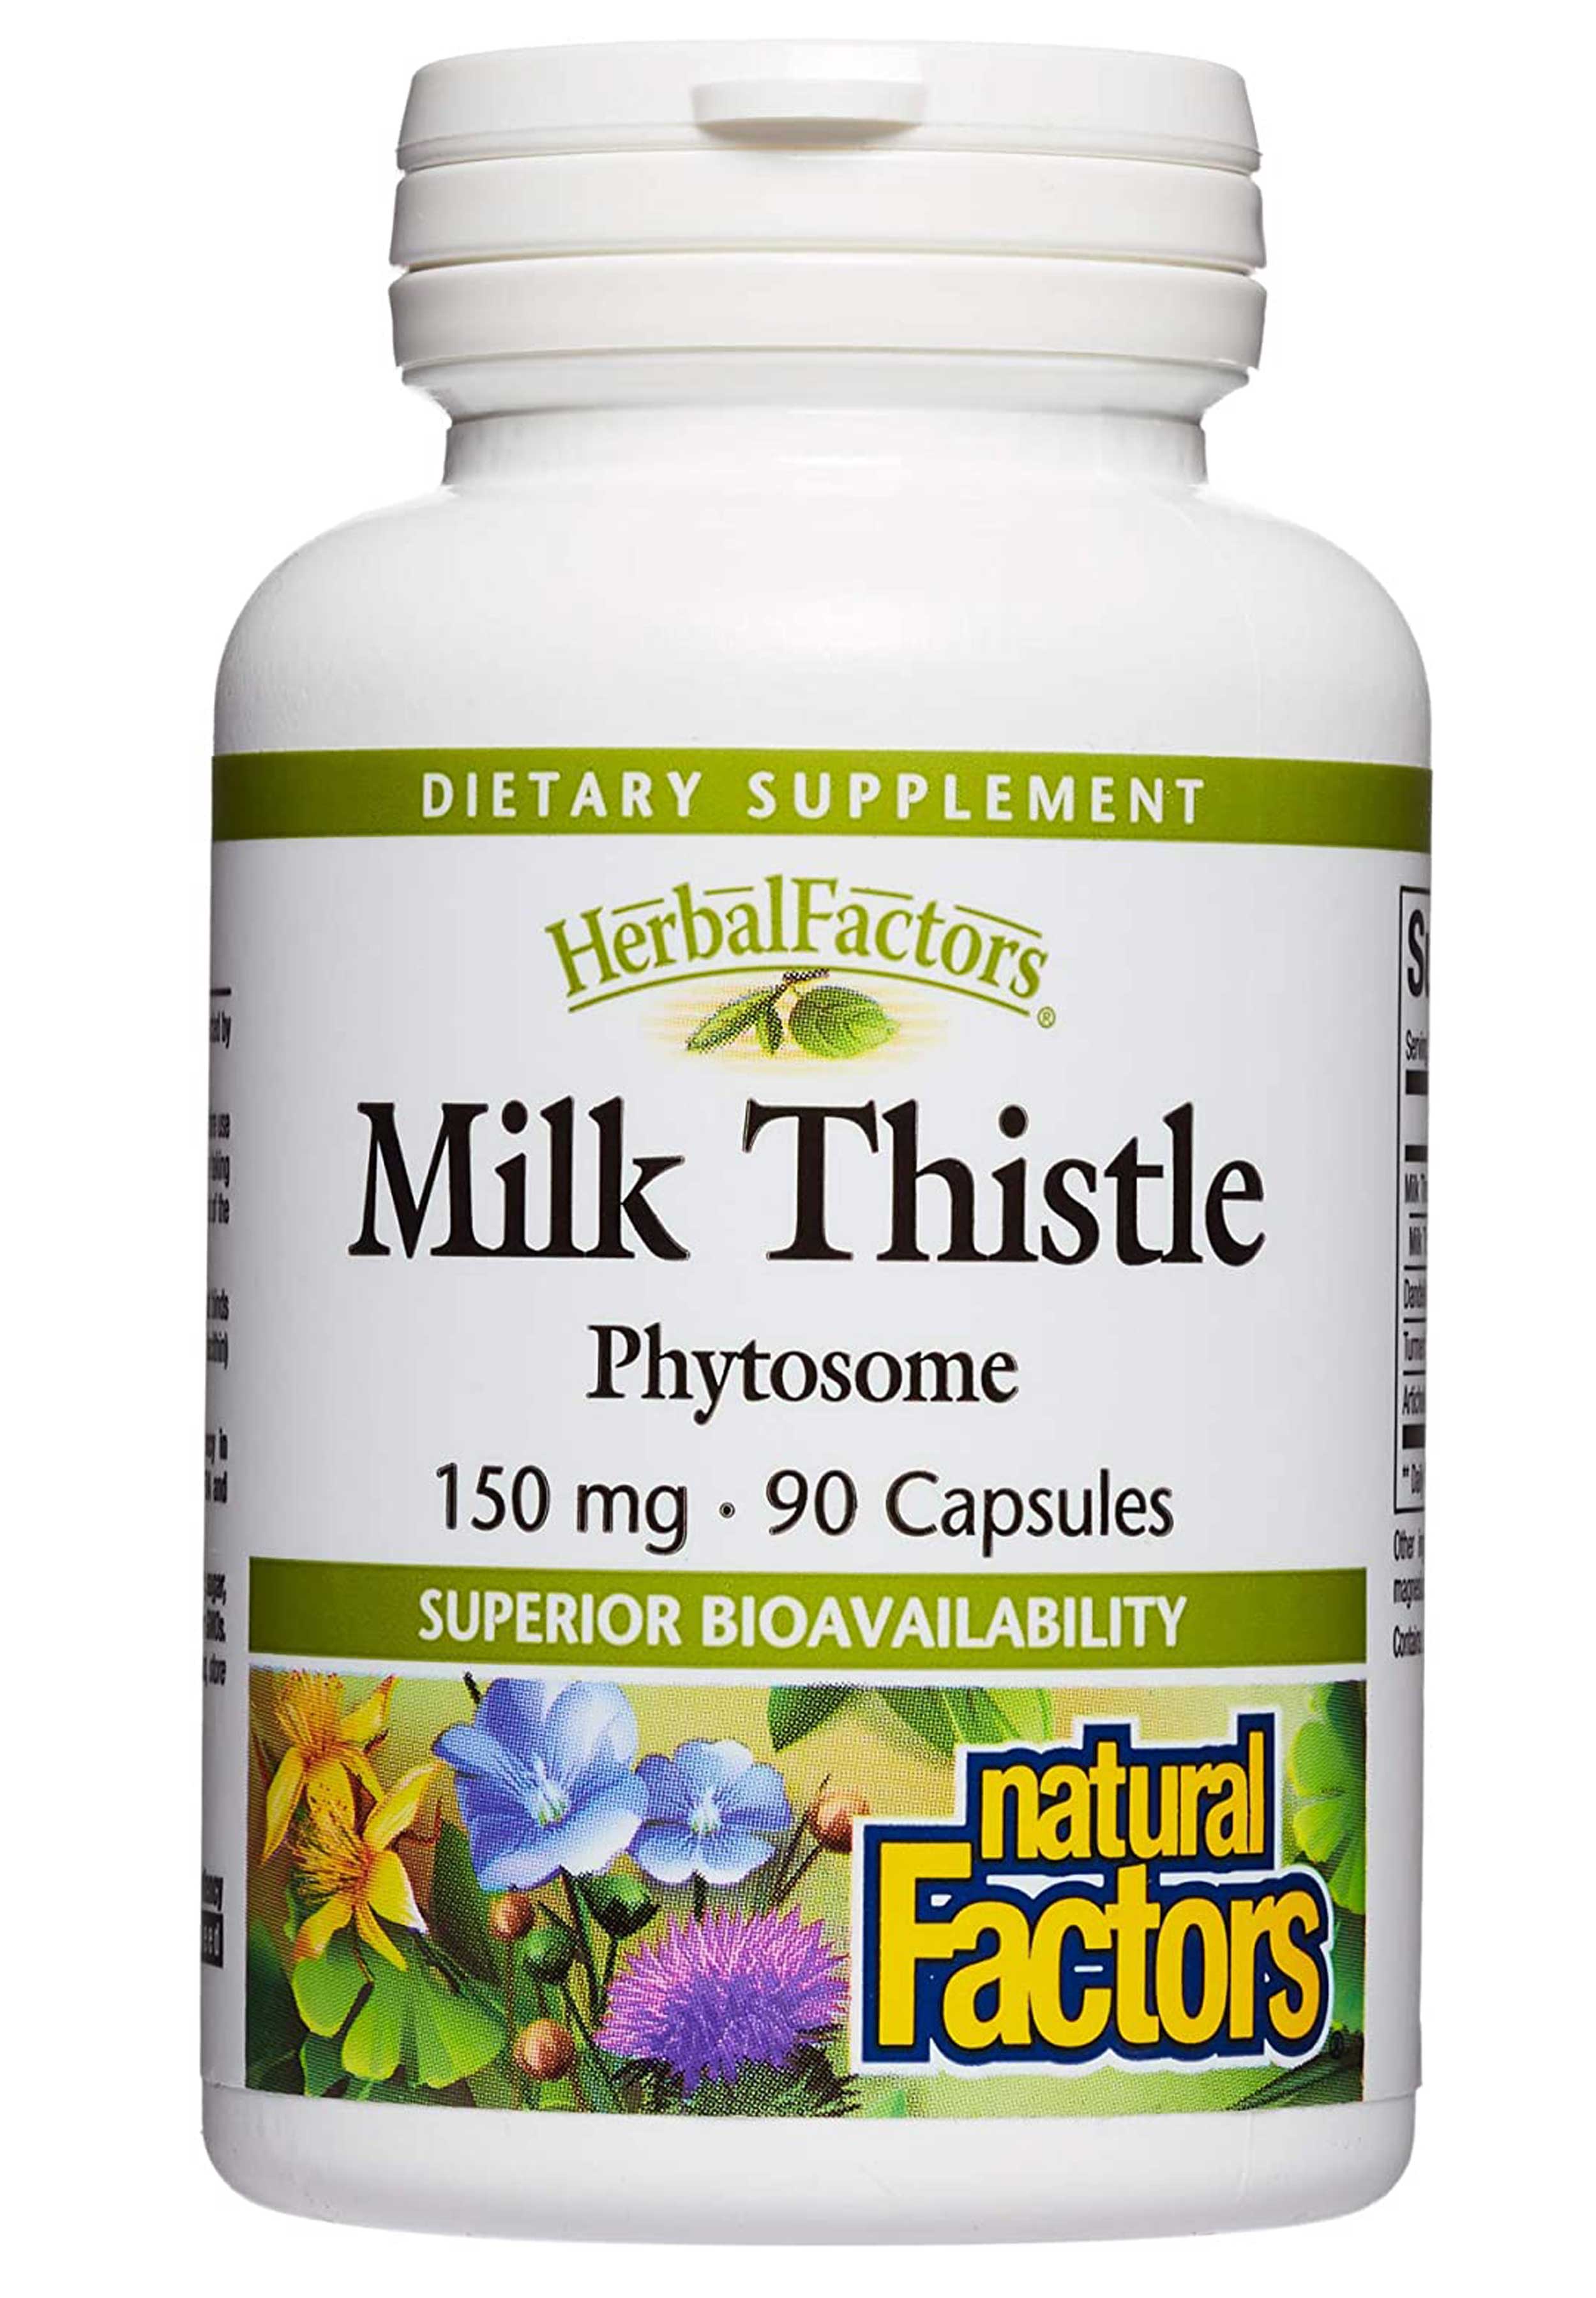 Natural Factors Milk Thistle Phytosome 